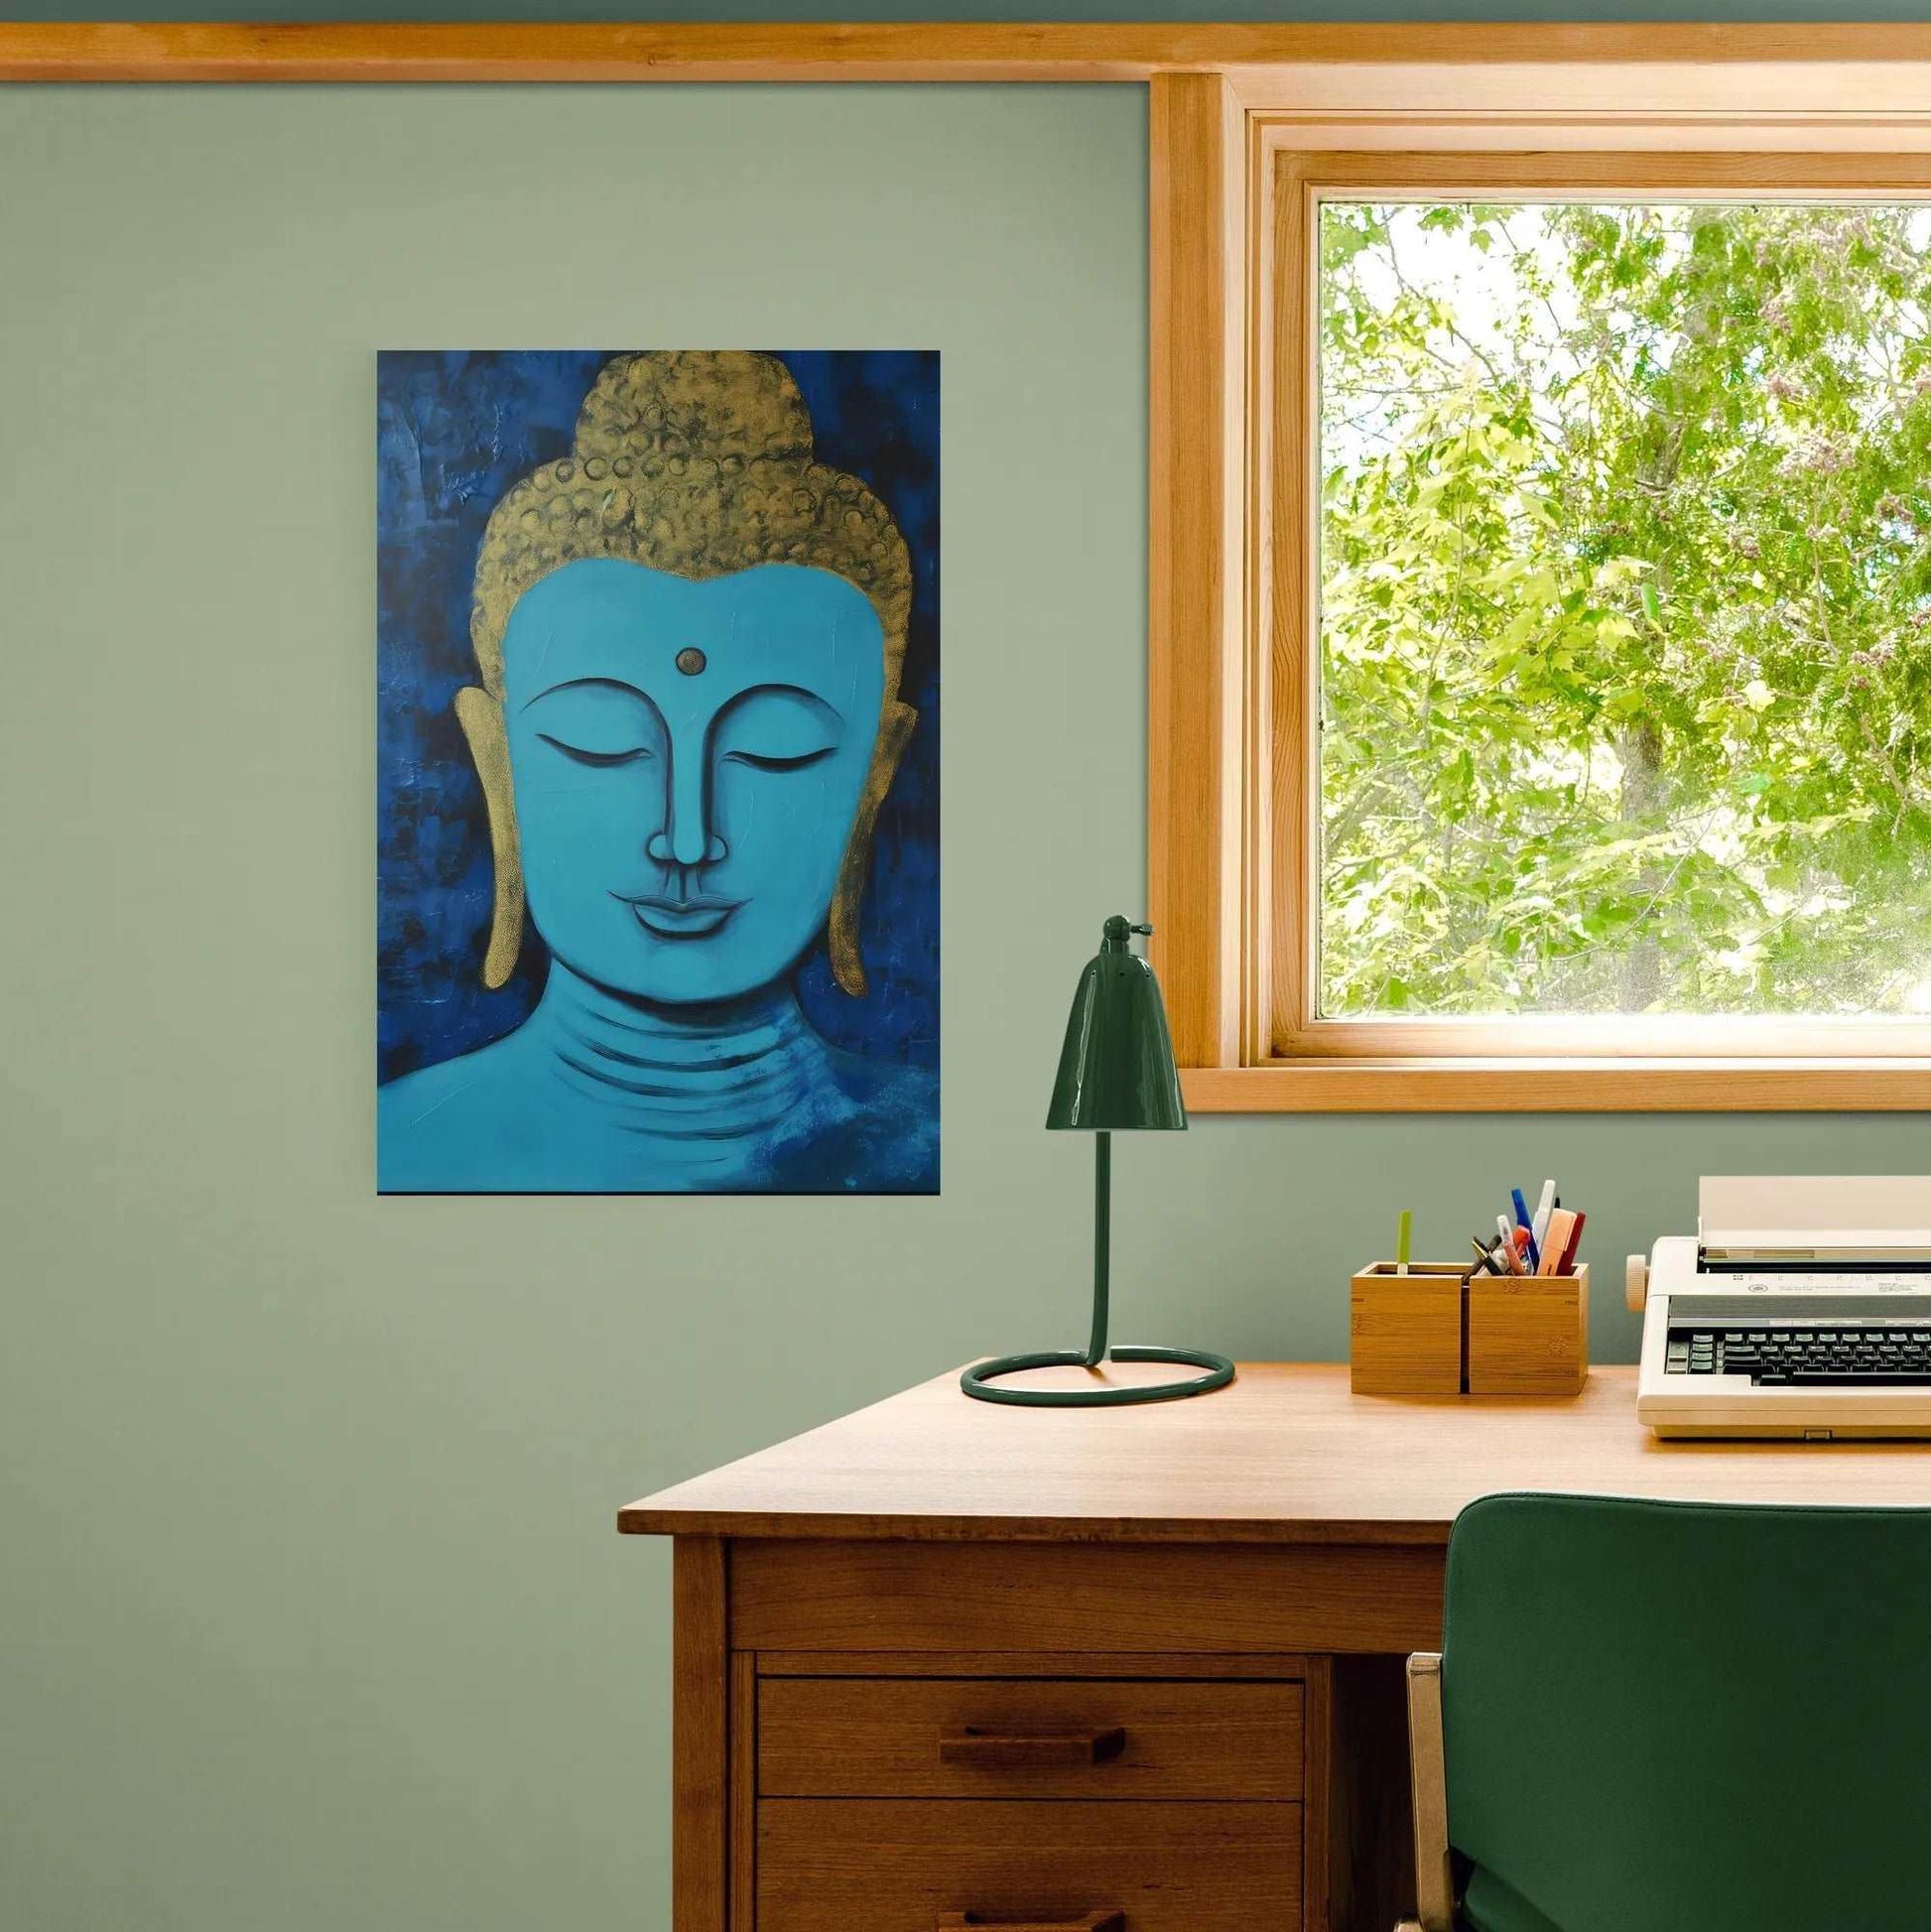 Calming blue Buddha painting on a green wall, complementing a home office space with a wooden desk, green chair, and typewriter.